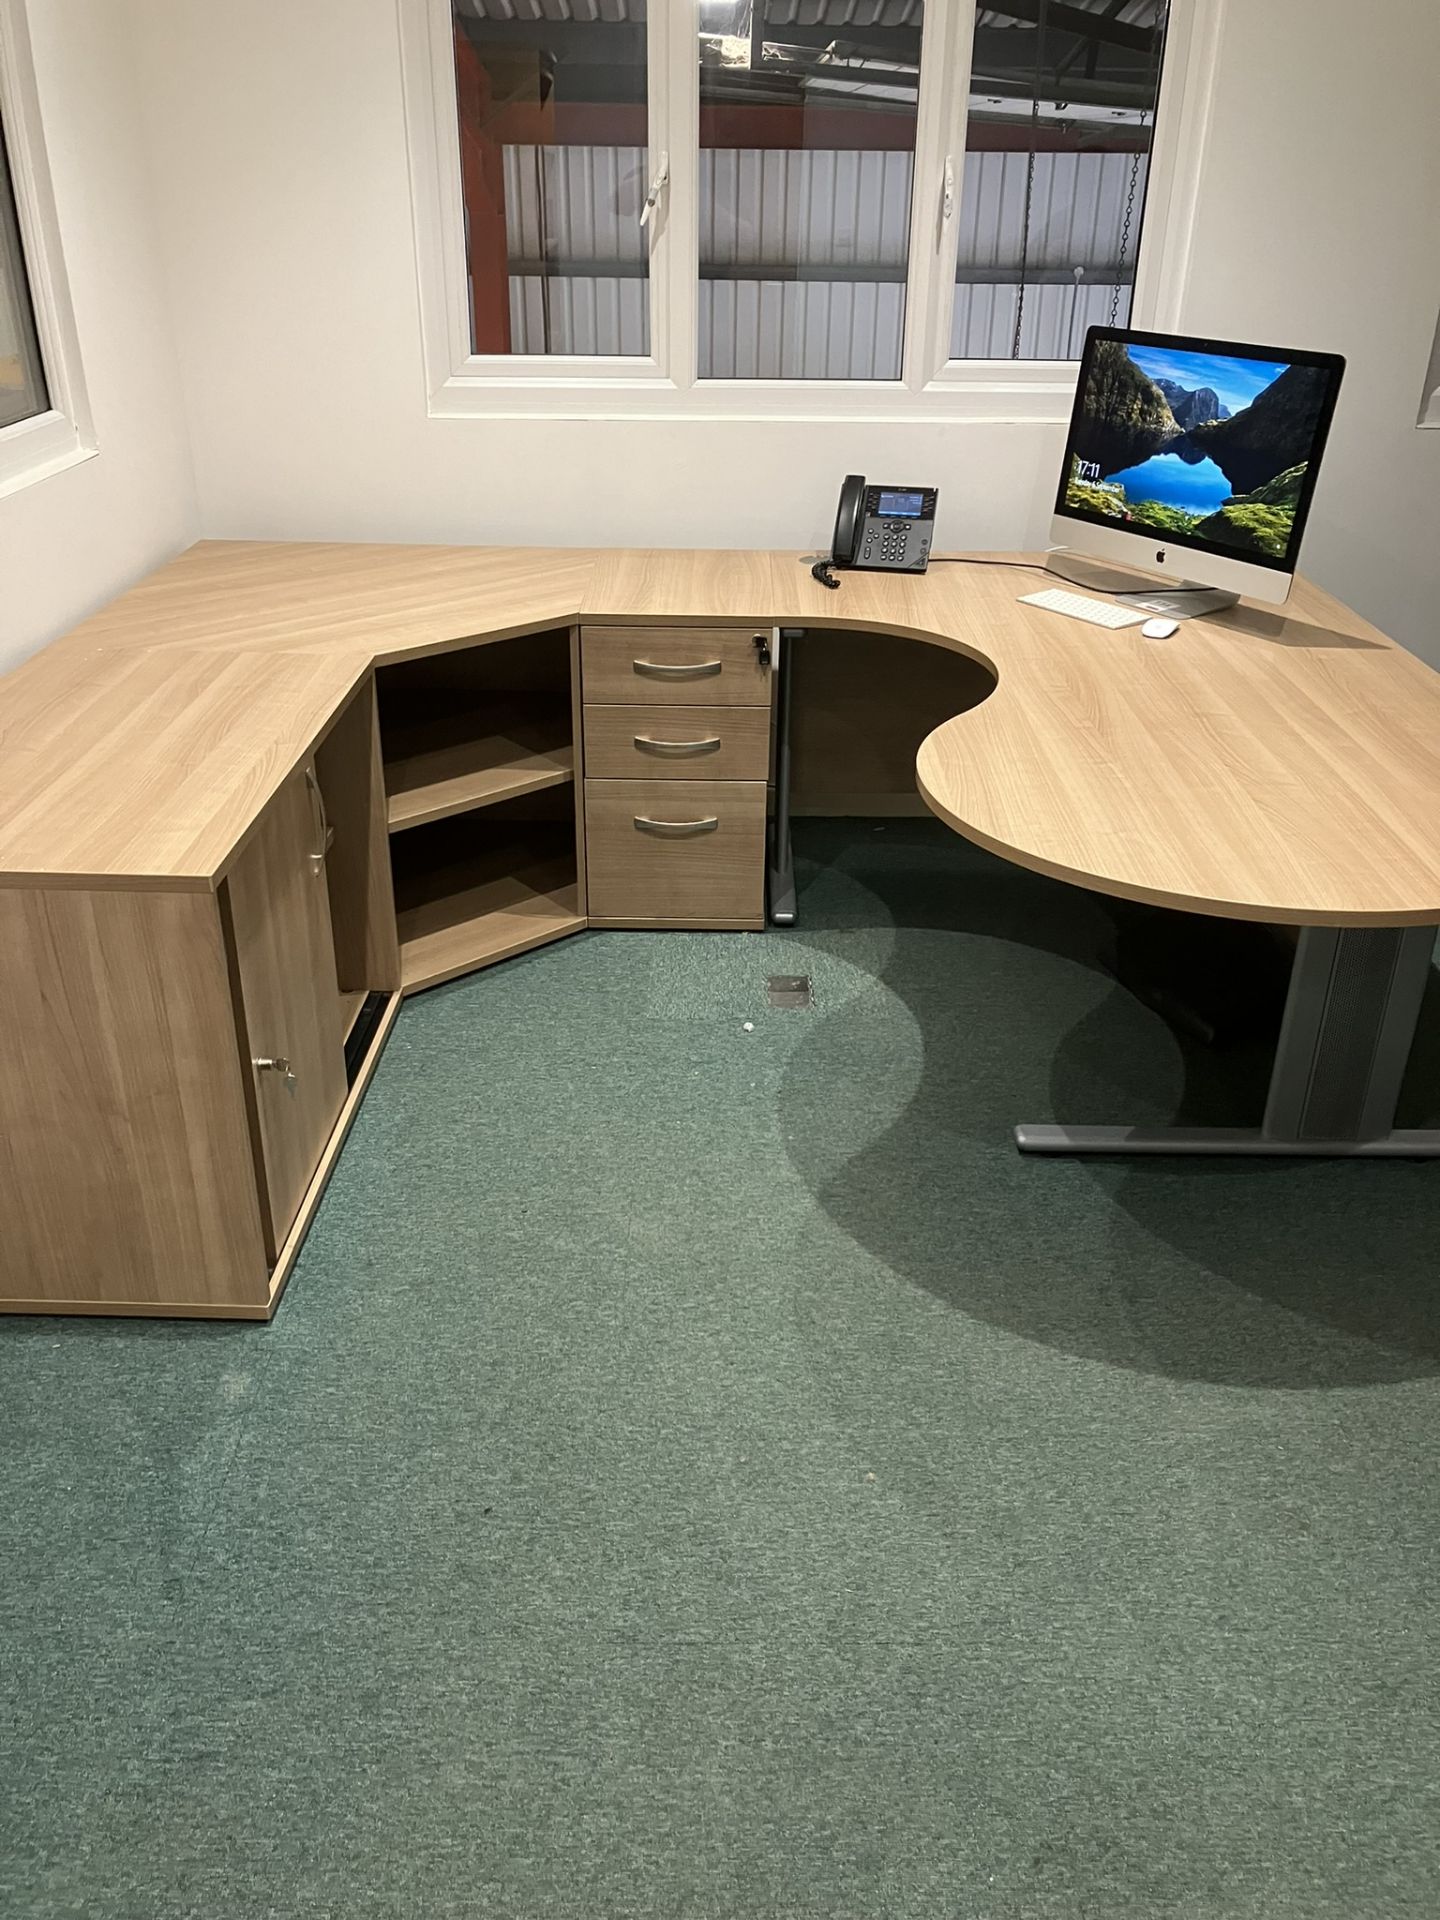 Office workstation to include pedestal and sliding door cupboard - Image 2 of 3